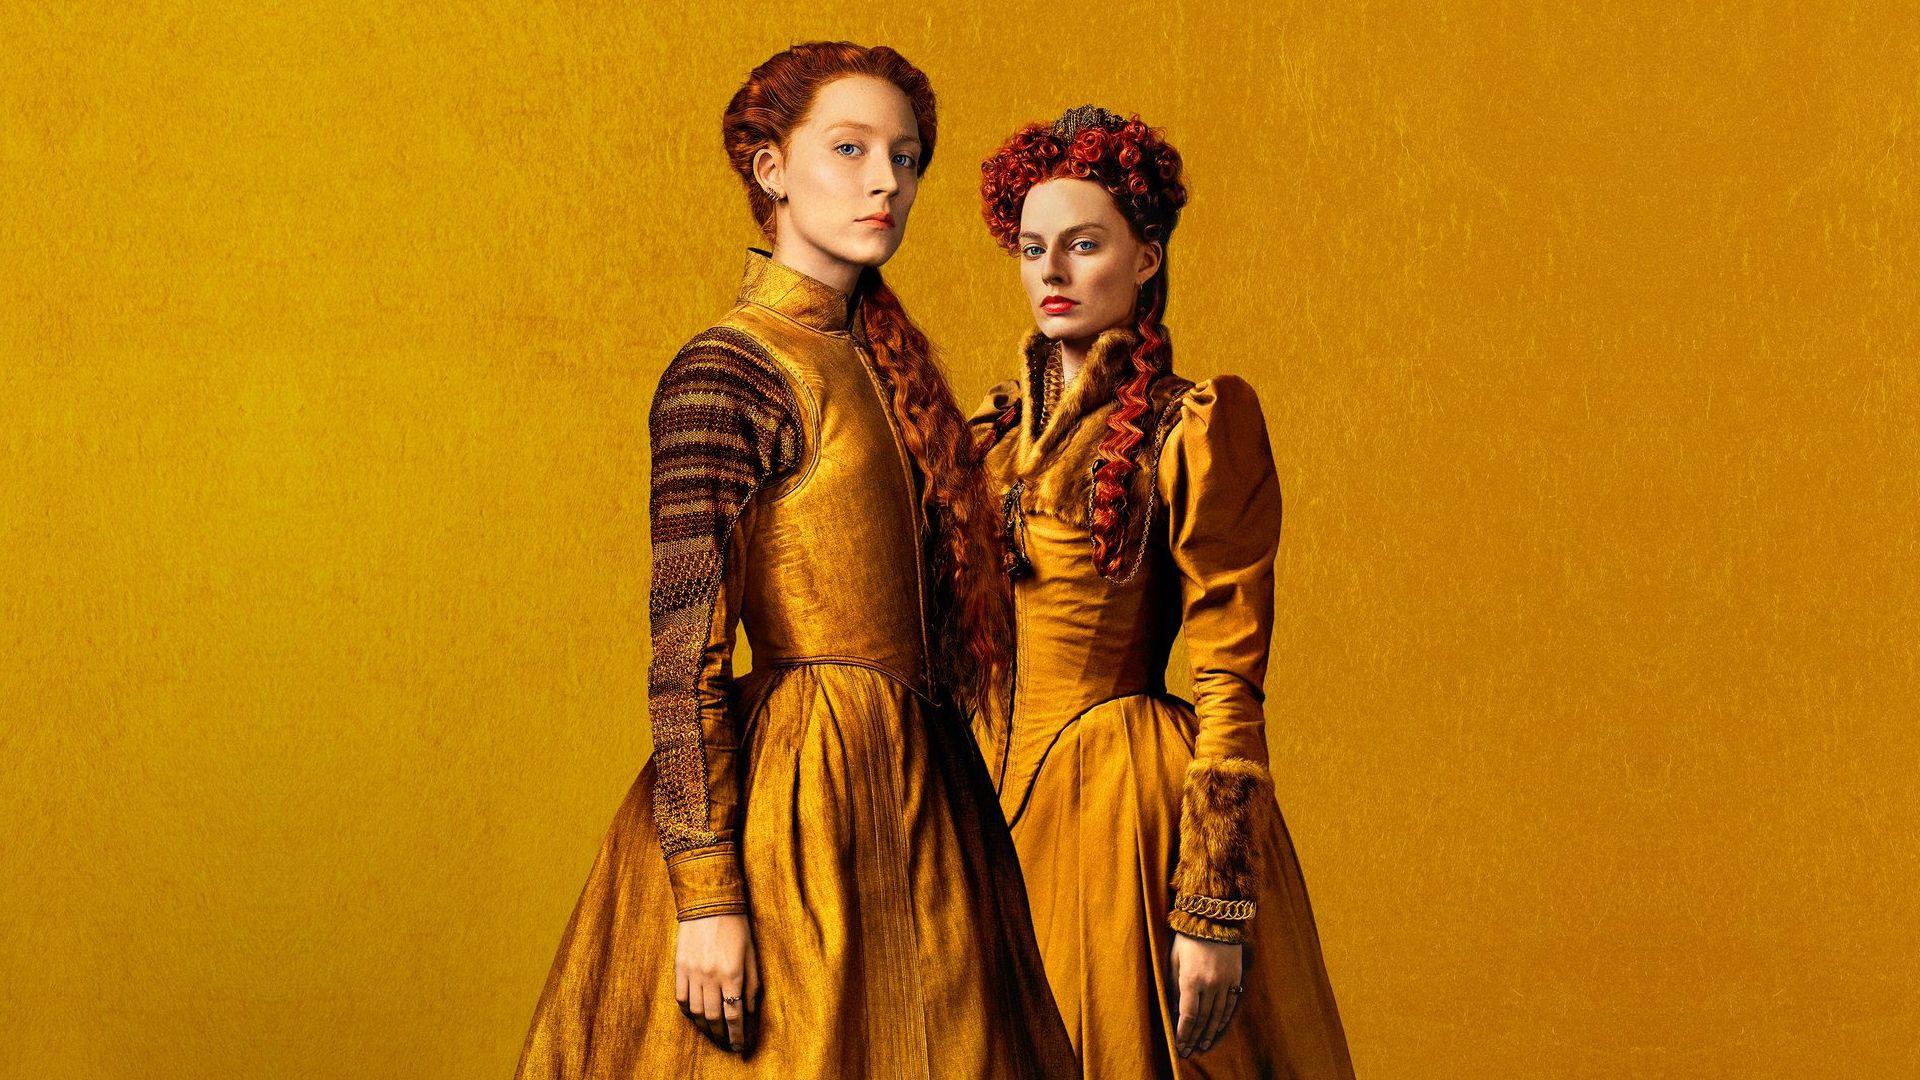 Margot Robbie And Saoirse Ronan In Mary Queen Of Scots 2018 Movie